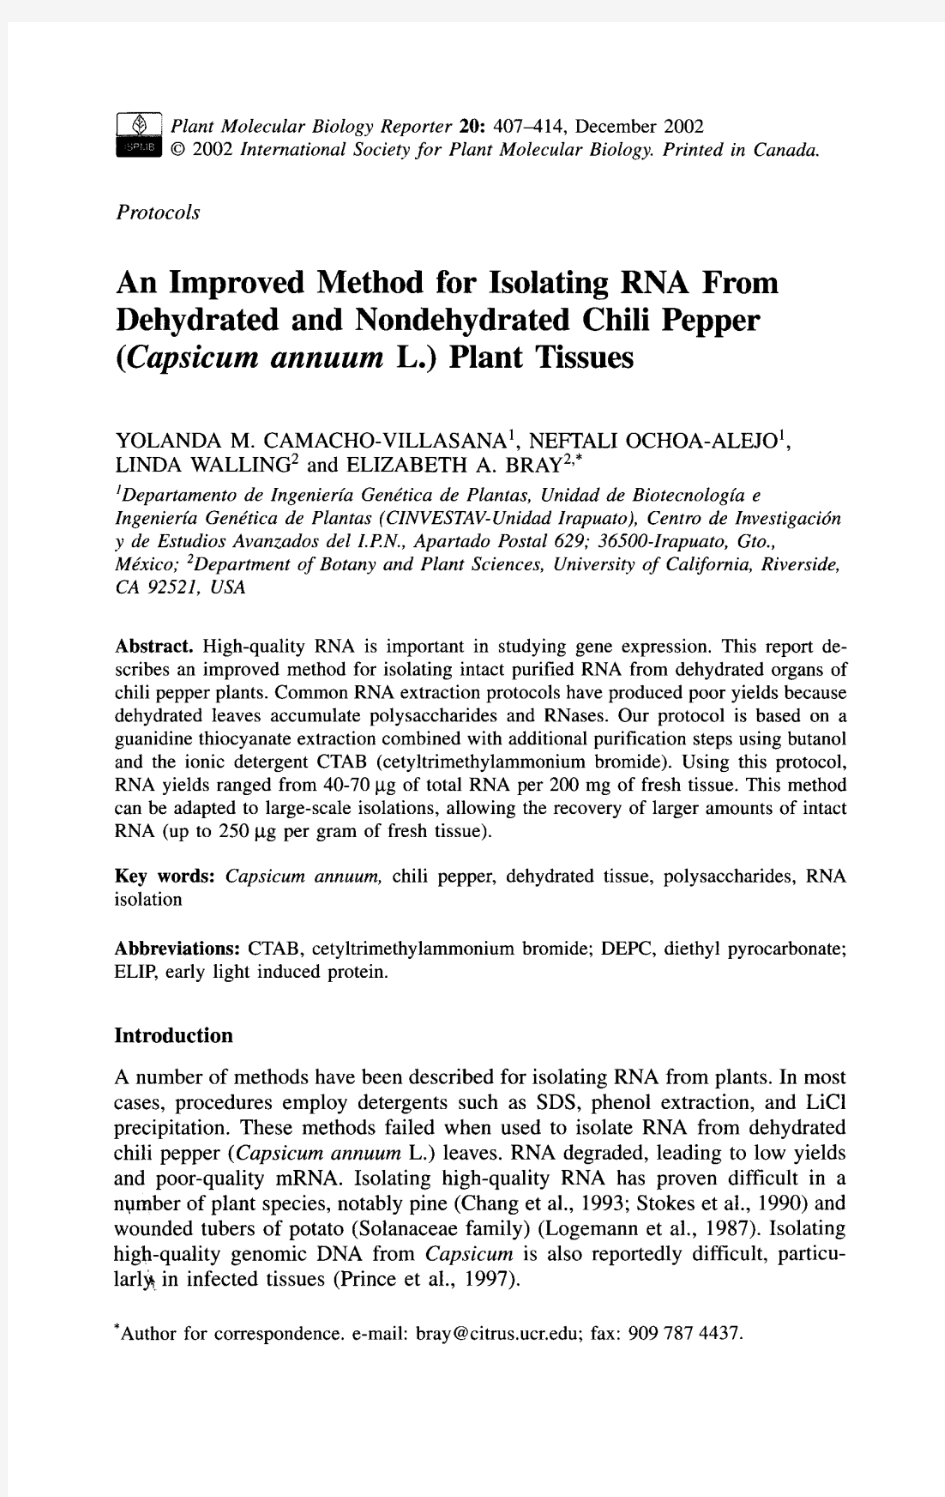 An improved method for isolating RNA from dehydrated and nondehydrated chili pepper plant tissues